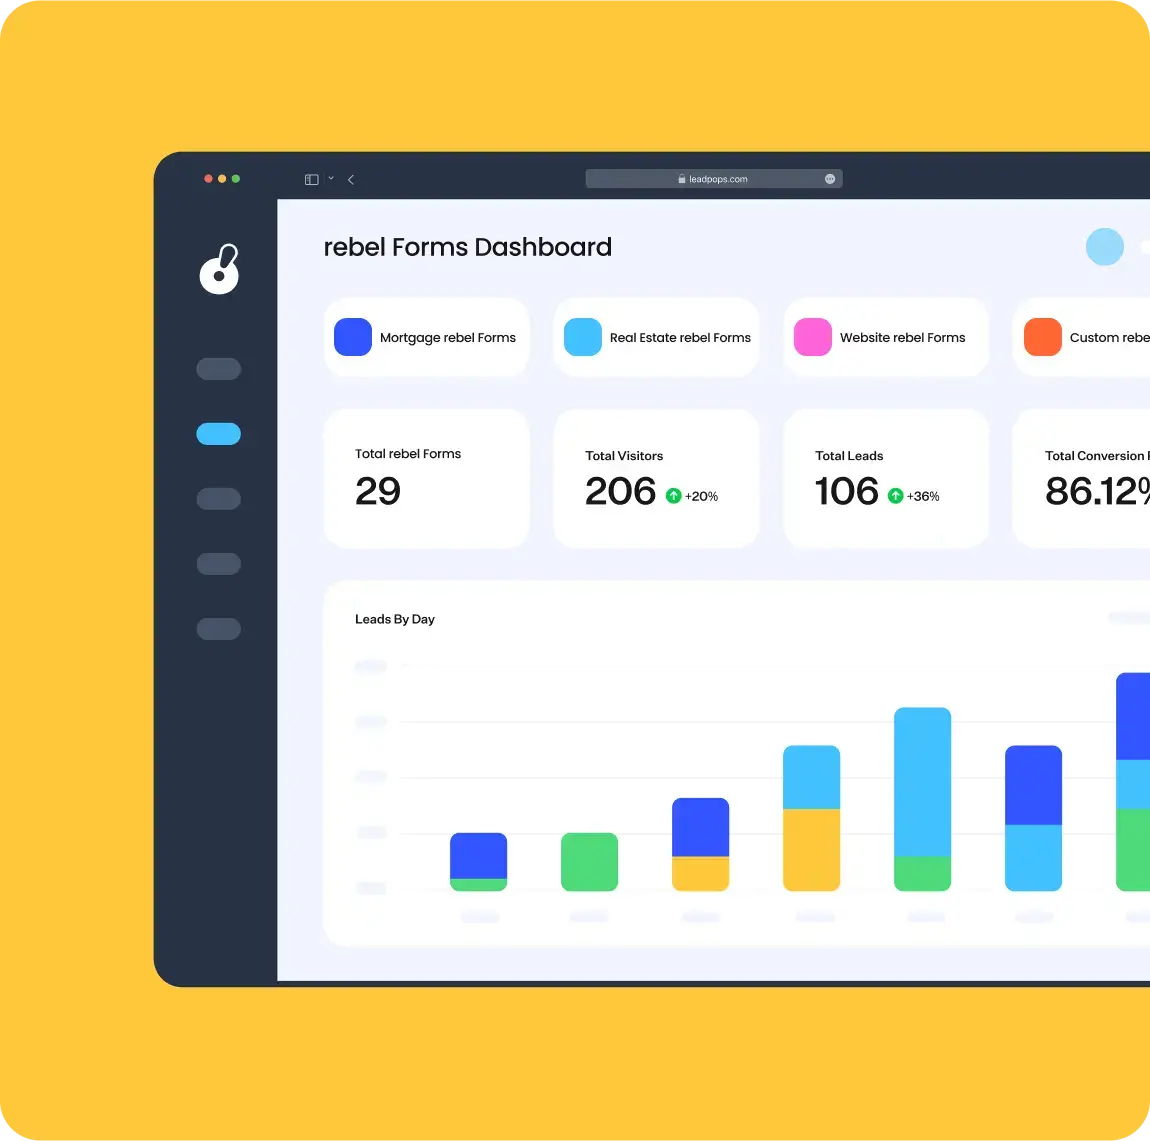 Residential mortgage leads Dashboard by rebel iQ